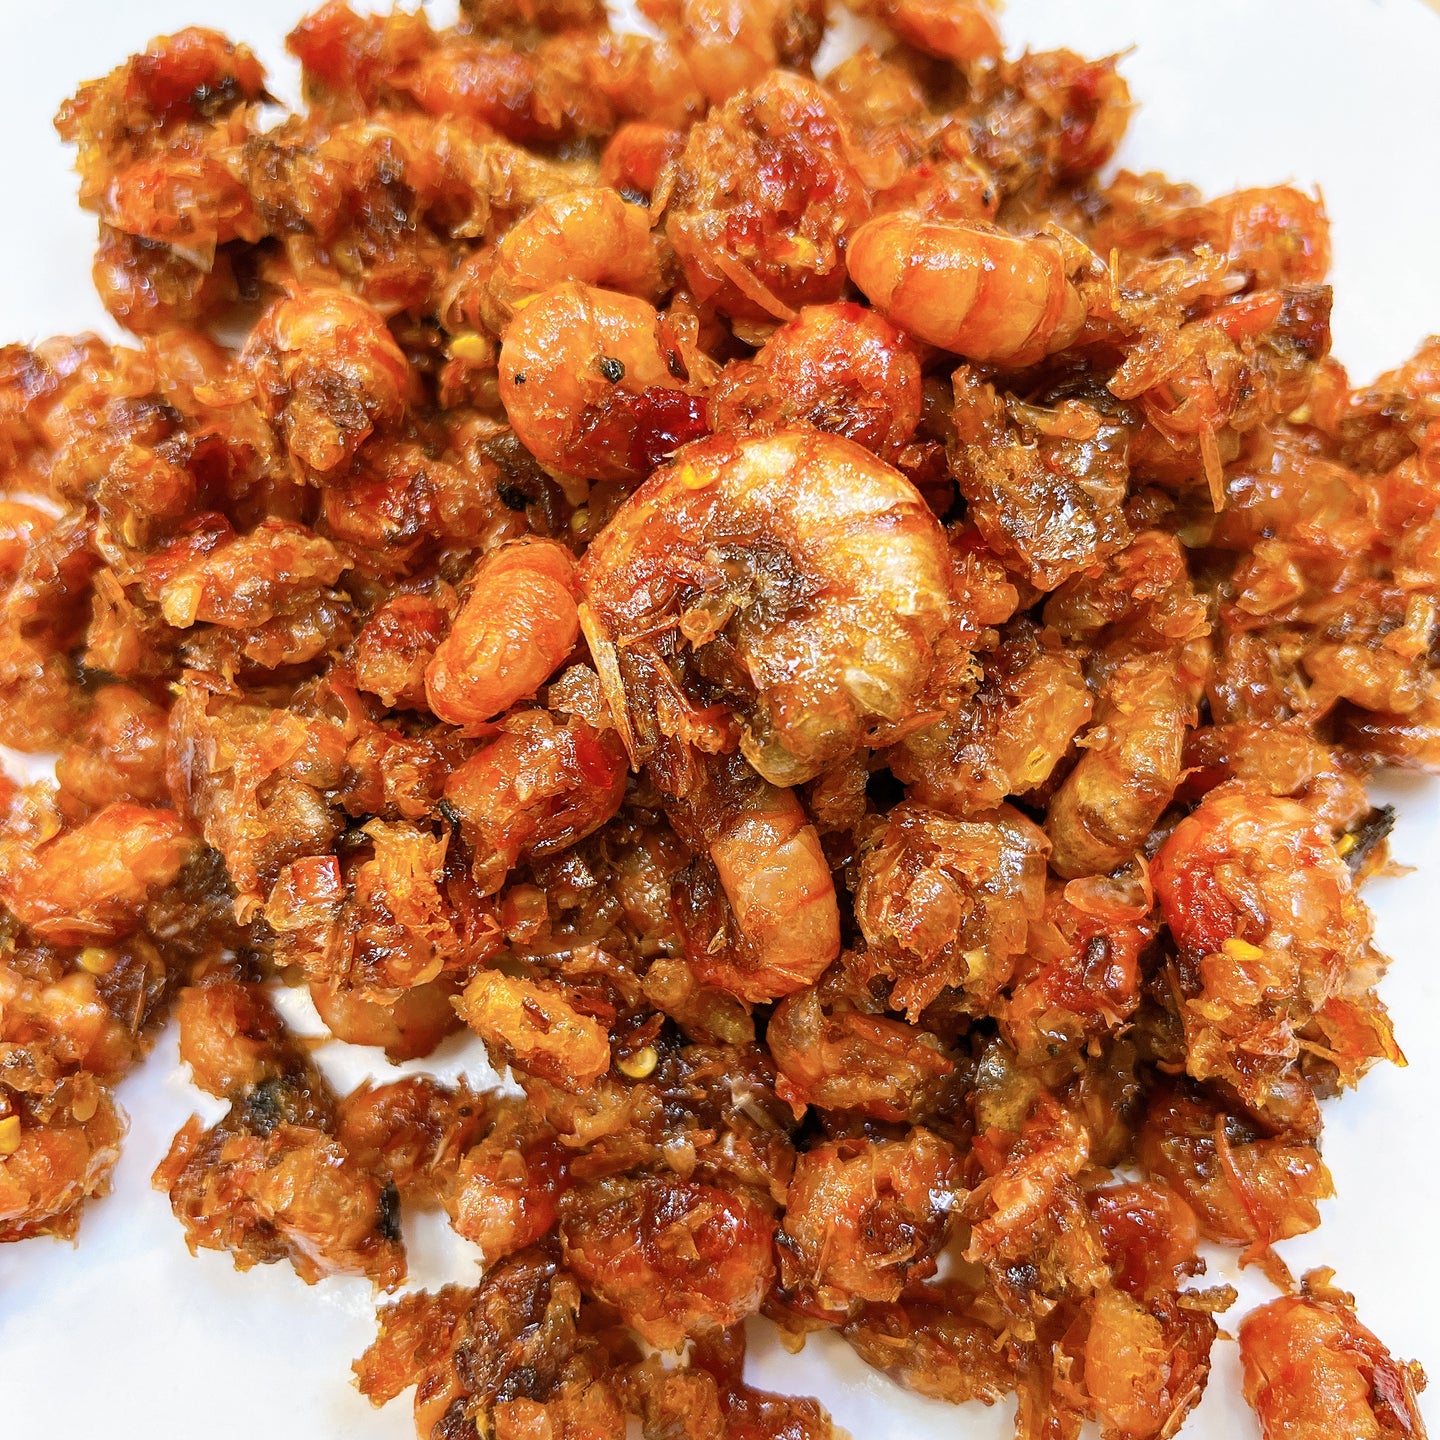 #2016: Spicy Shrimp sweet and sour - Tôm Kho Tộ Rim Me Cay Chua ngọt.